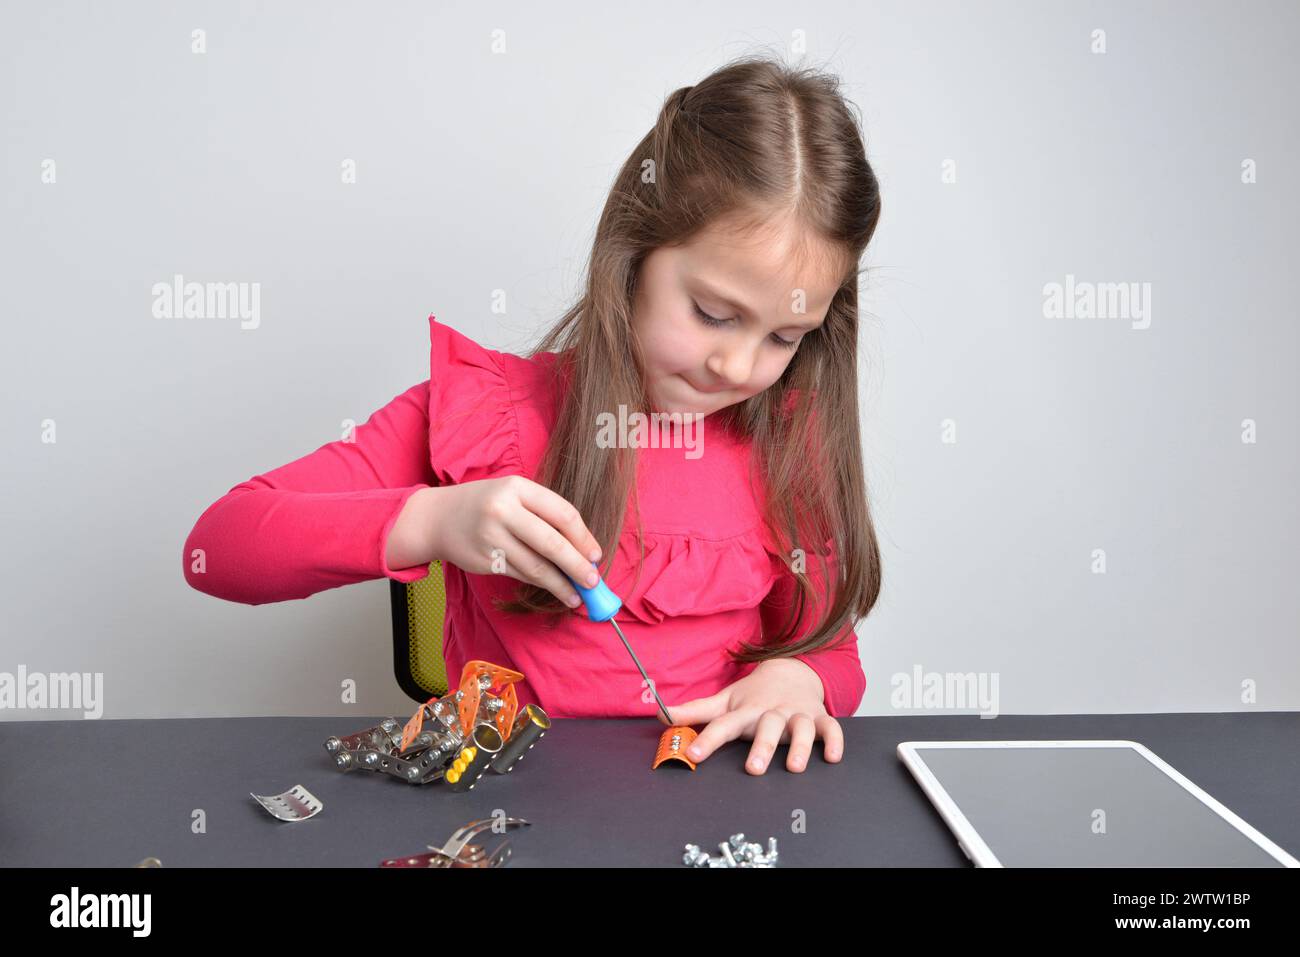 Little girl screws metal parts onto a robot. Concept of hands-on learning, education, creativity, and engineering exploration Stock Photo